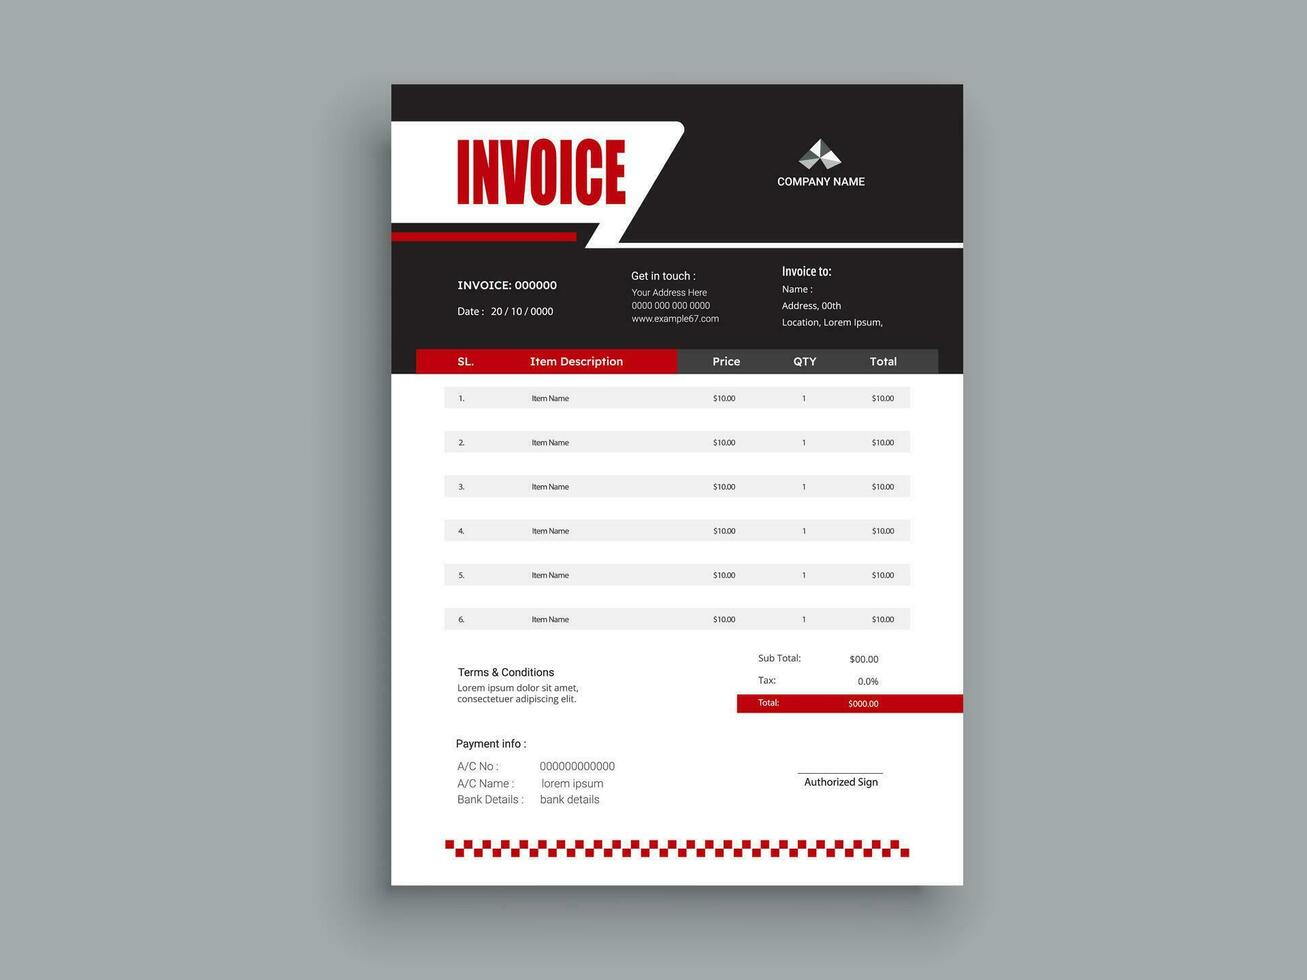 Invoice Design. Business invoice form template. Invoicing quotes, money bills or pricelist and payment agreement design templates. Tax form,  bill graphic or payment receipt. vector